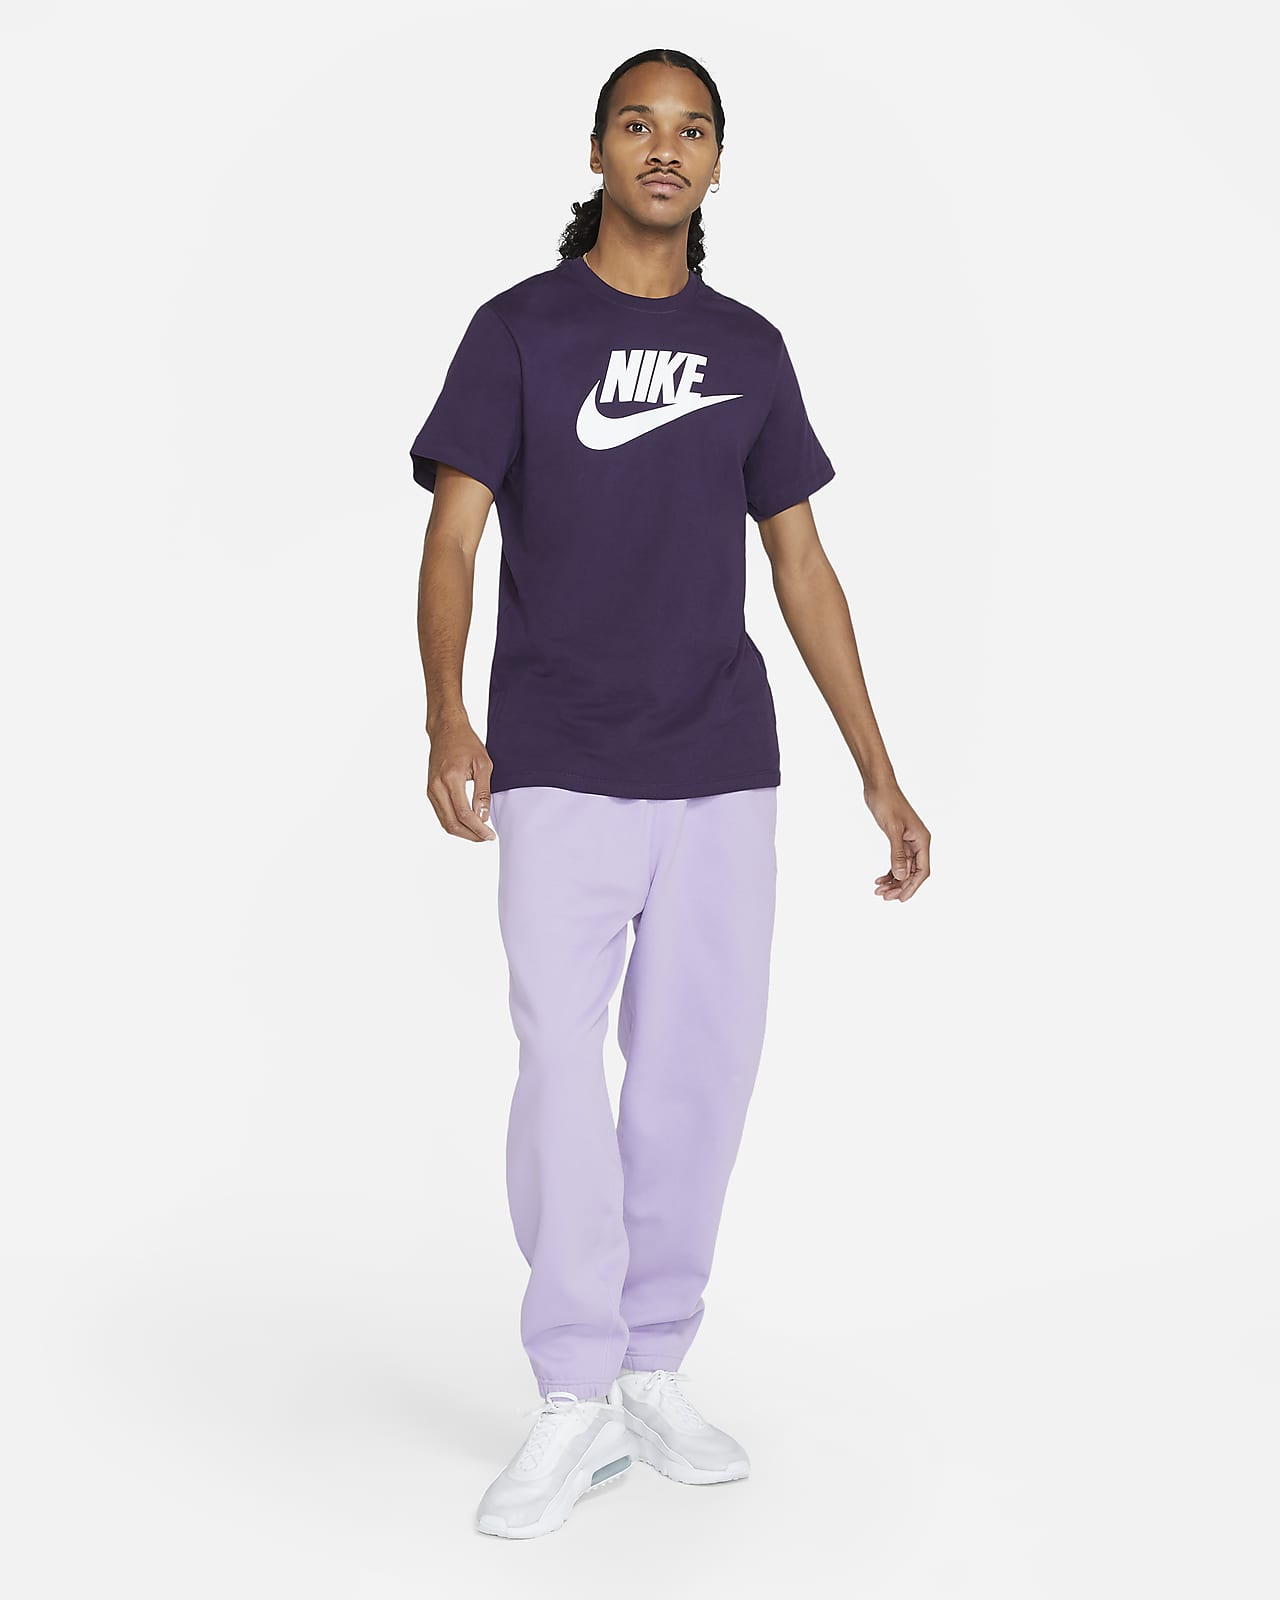 nike special t shirt